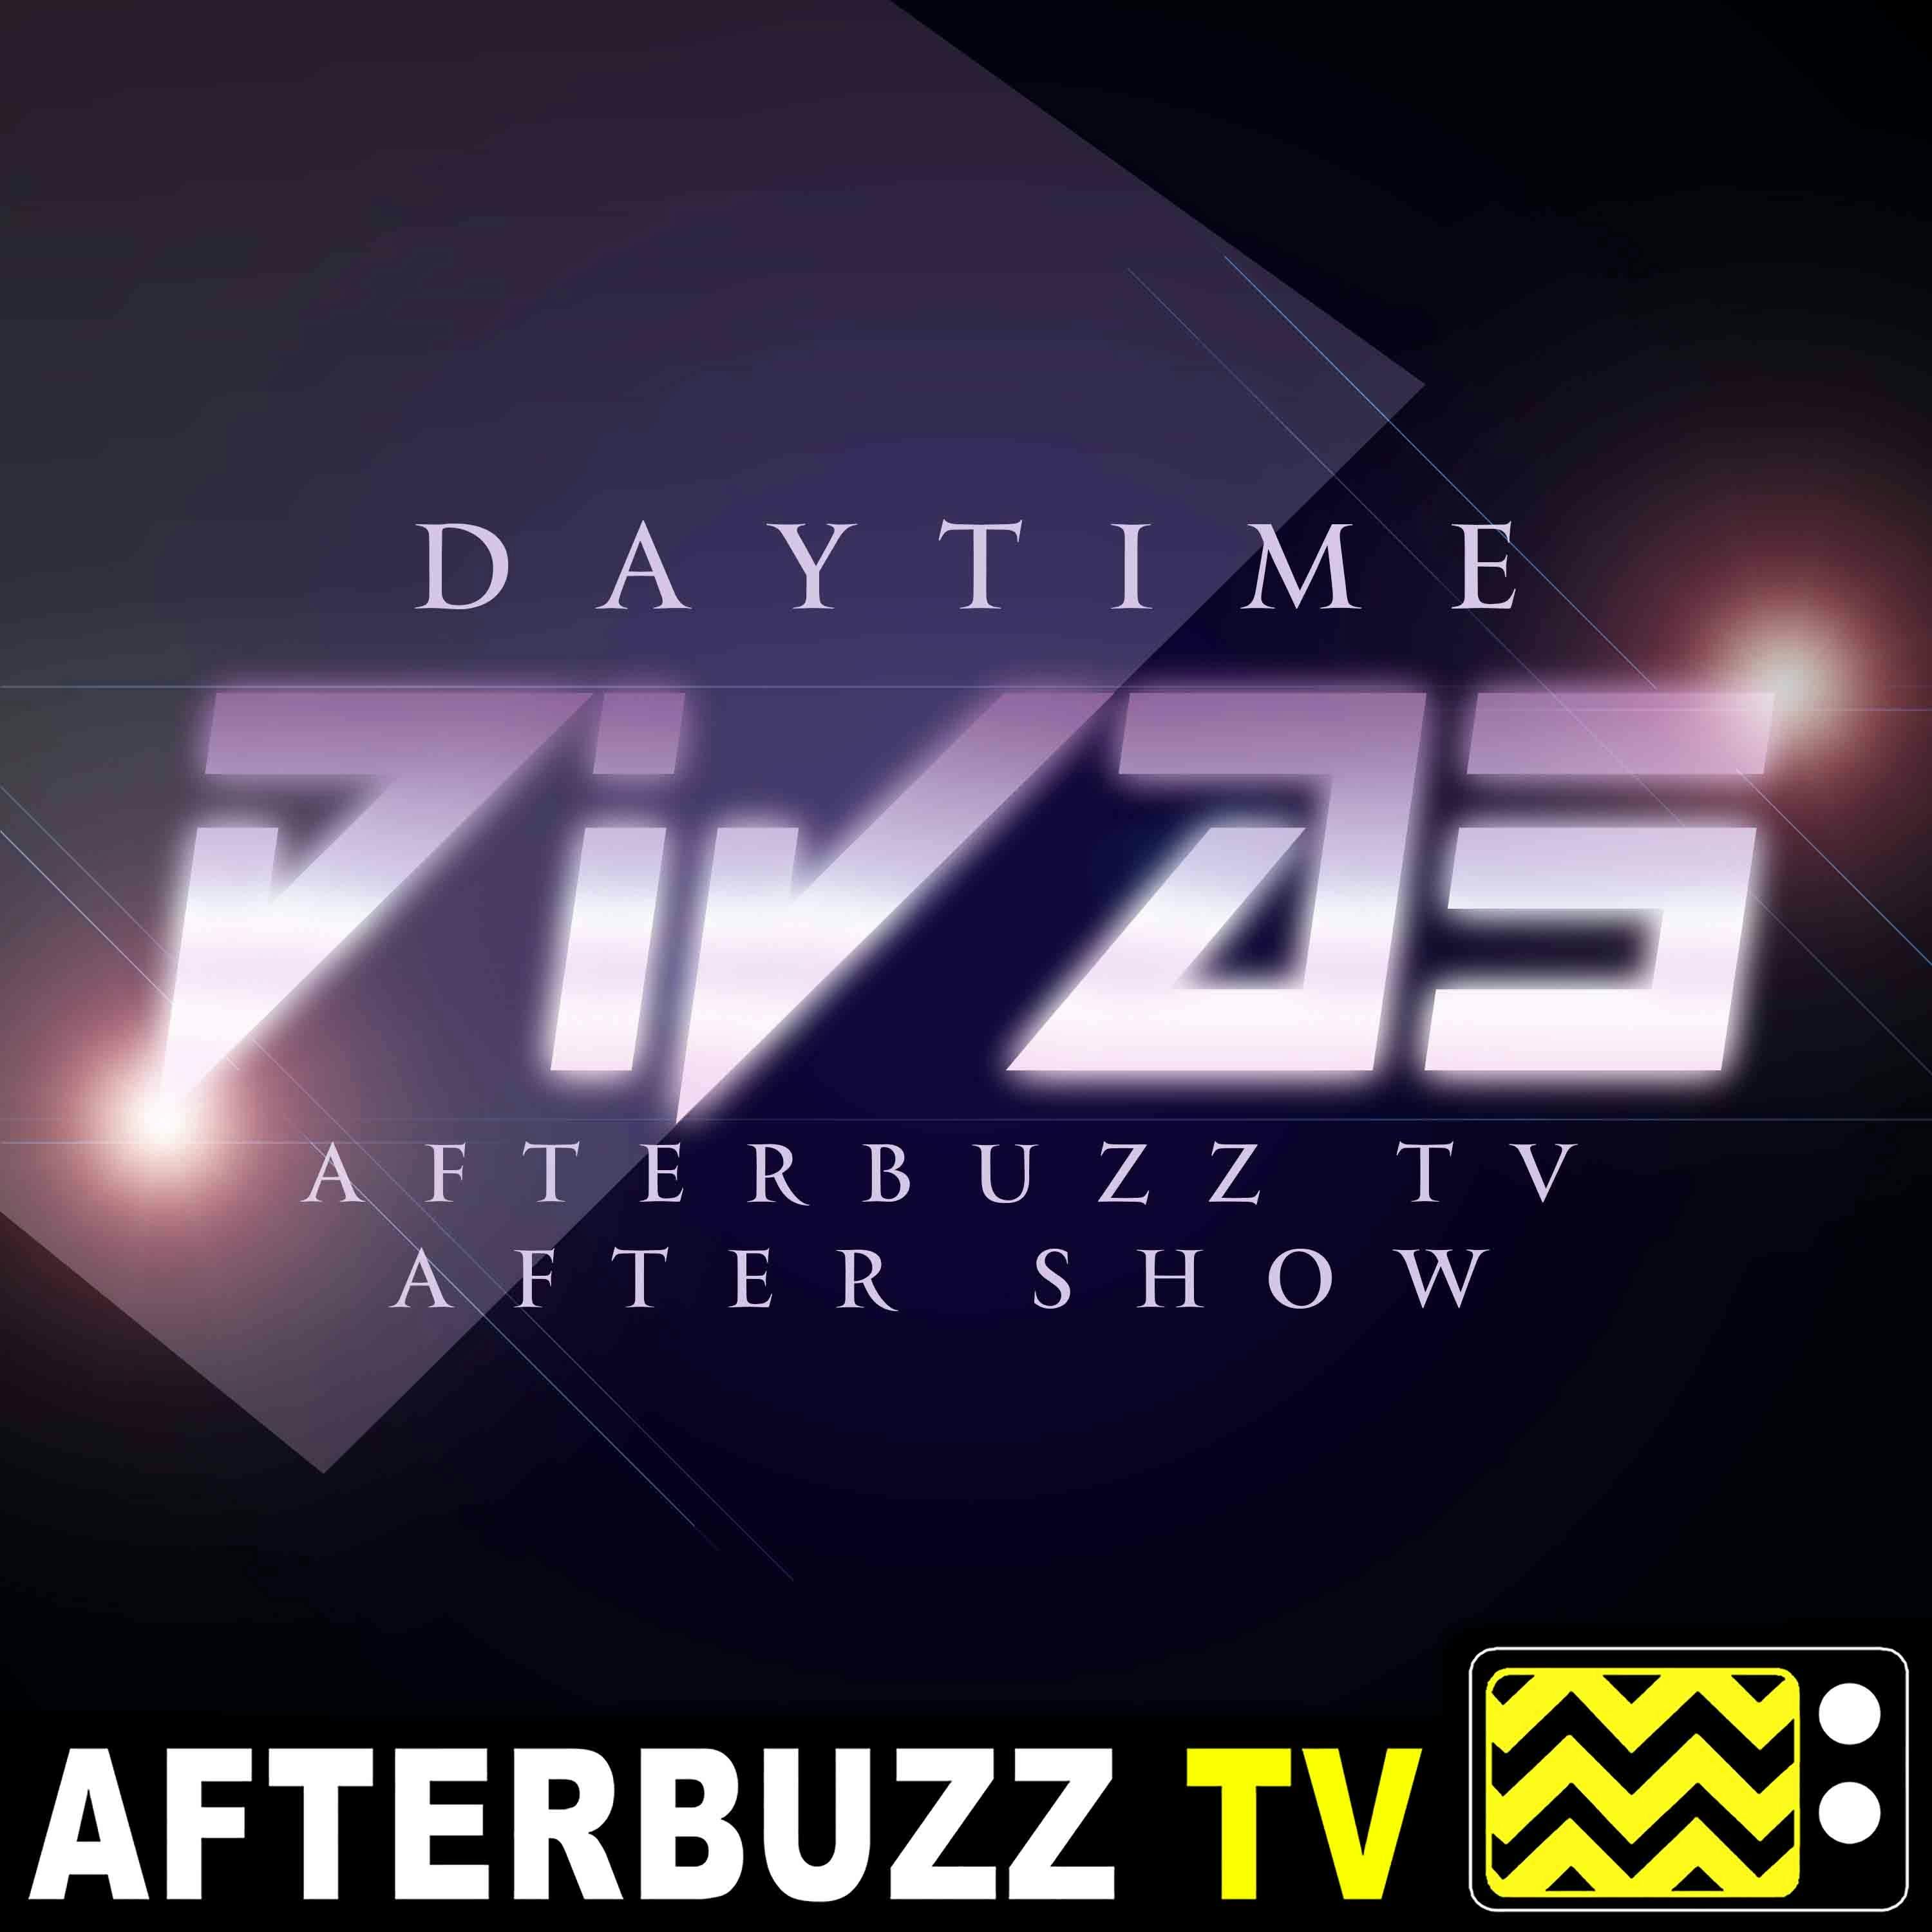 Daytime Divas S:1 | Special with Fiona Gubelmann & Camille Guaty | AfterBuzz TV AfterShow